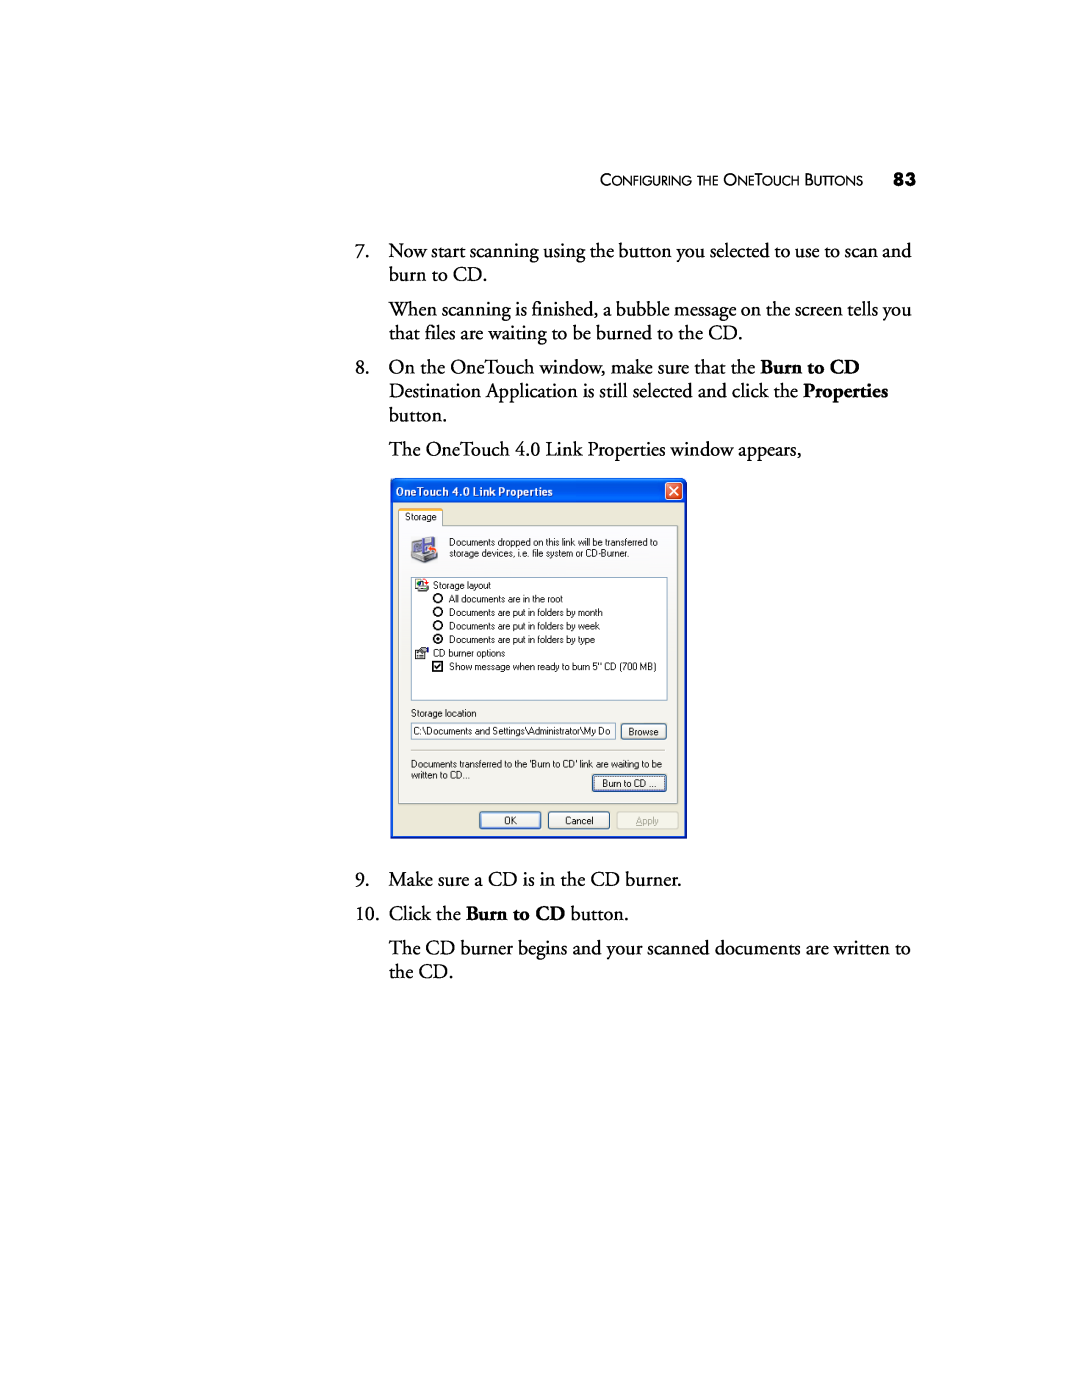 Visioneer XP 470 manual The OneTouch 4.0 Link Properties window appears 